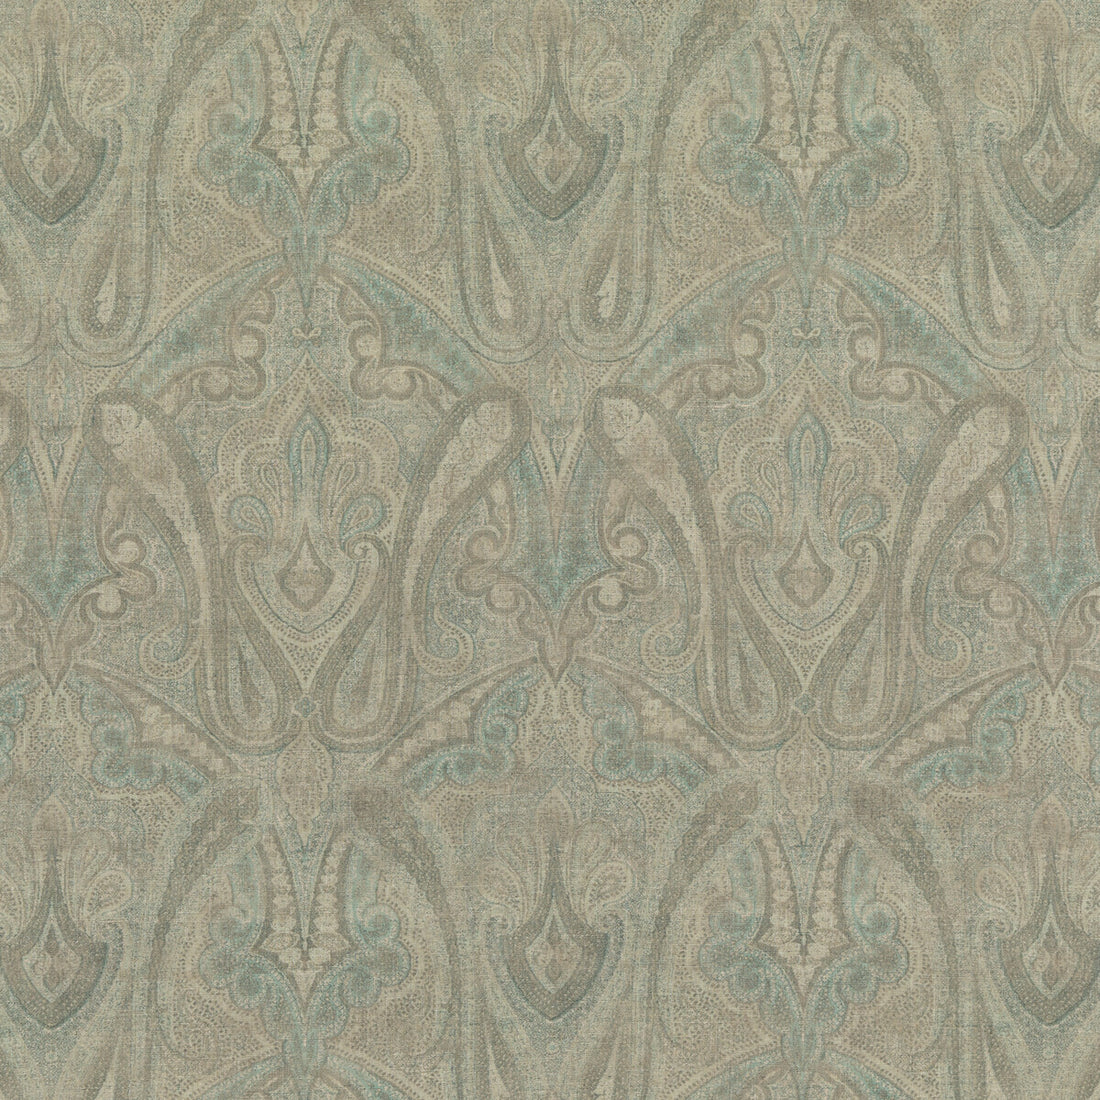 Canvas Paisley fabric in sage color - pattern FD307.S108.0 - by Mulberry in the Modern Country II collection